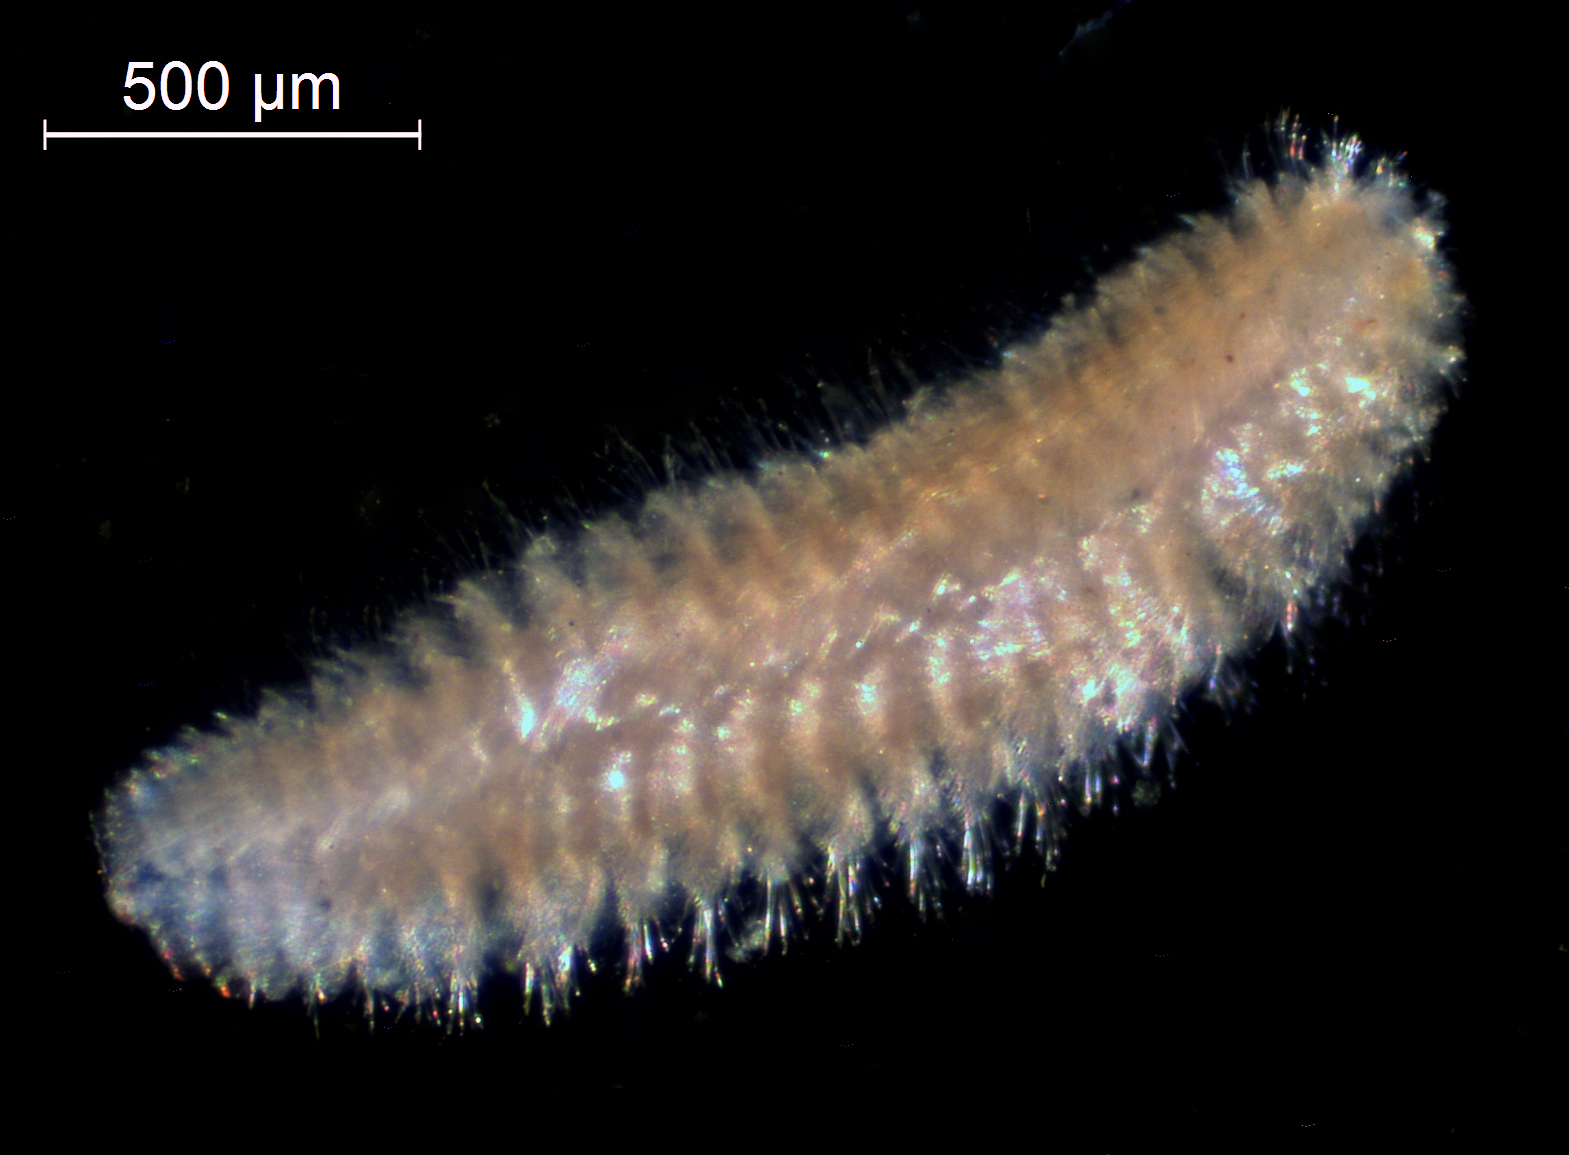 Top view of a shiny gold worm with a slightly fuzzy appearance on a black background. Scale bar reads, 500 um.